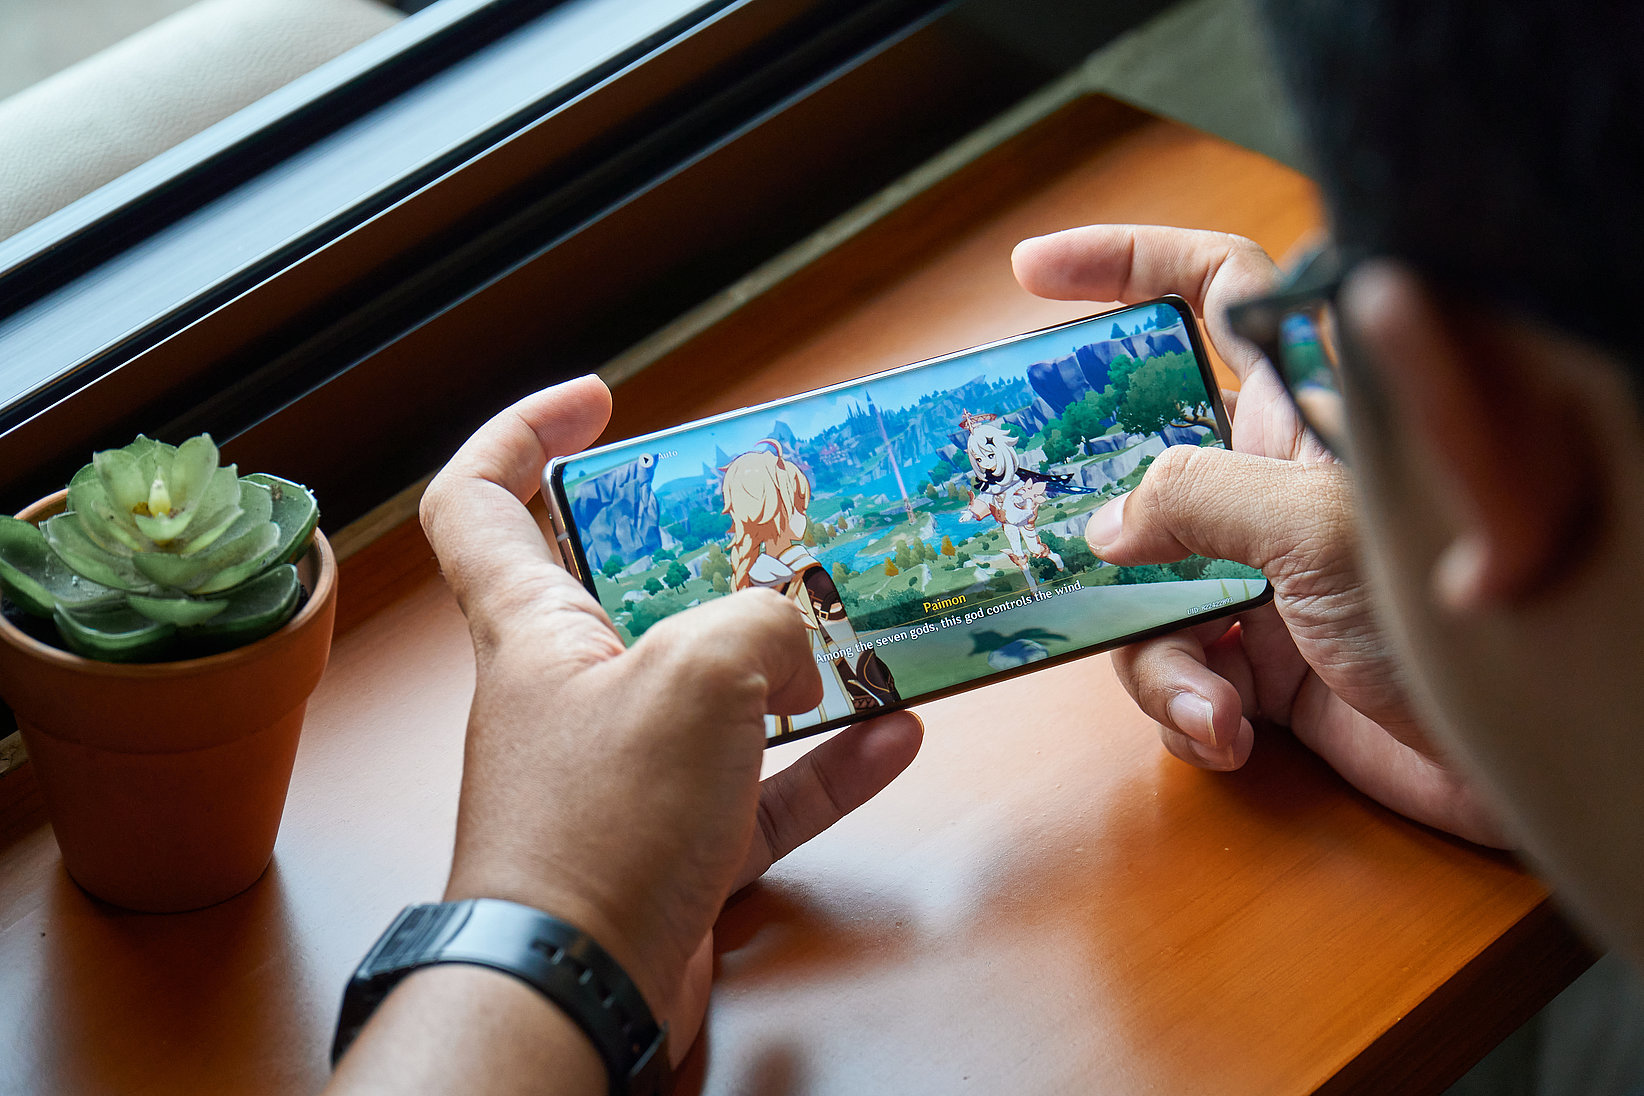 A mobile phone is held in the hand, where the screenshot shows that the fantasy action role-playing game "Genshi Impact" is being played.